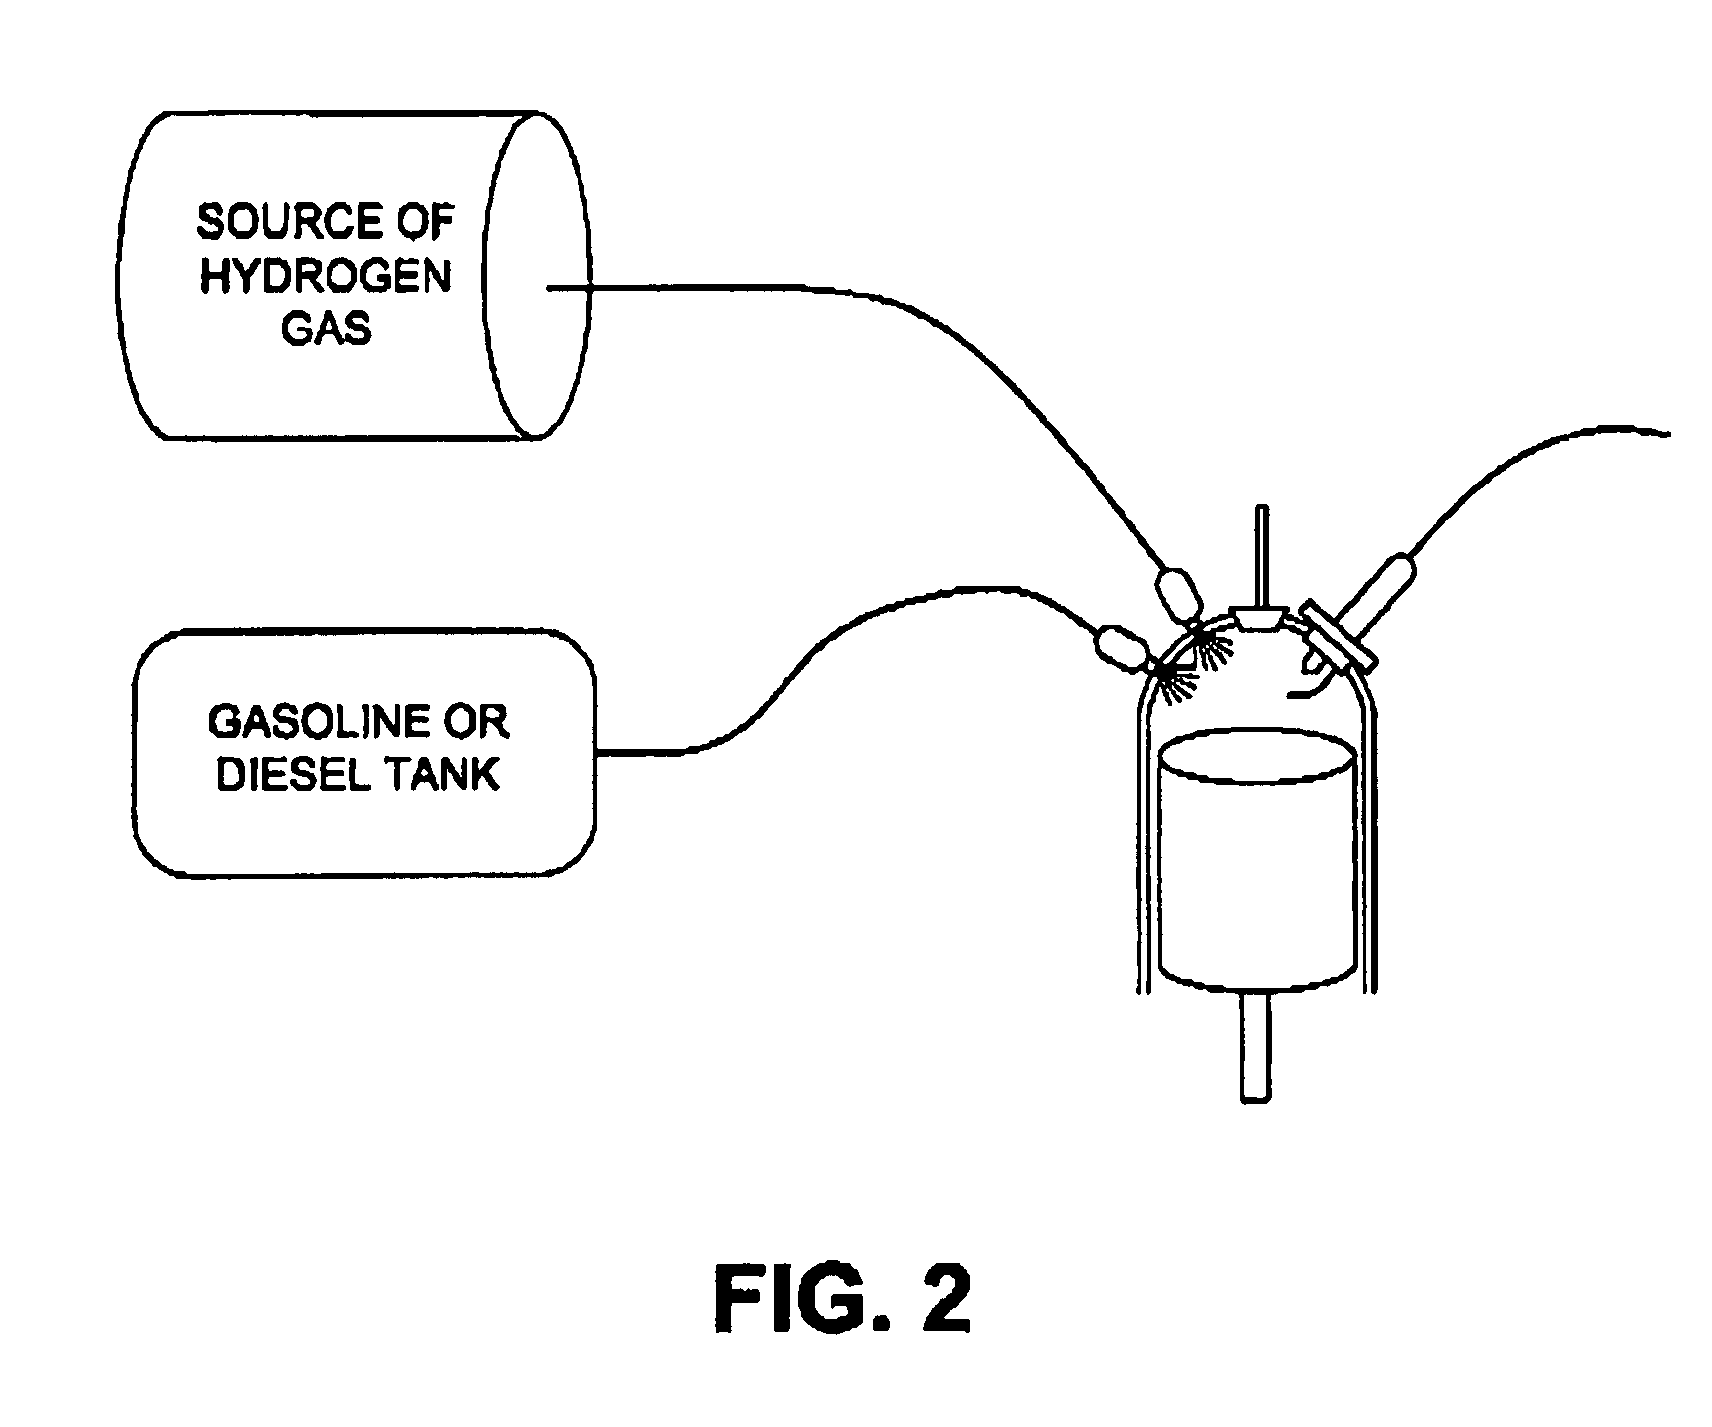 System and method for operating an internal combustion engine with hydrogen blended with conventional fossil fuels